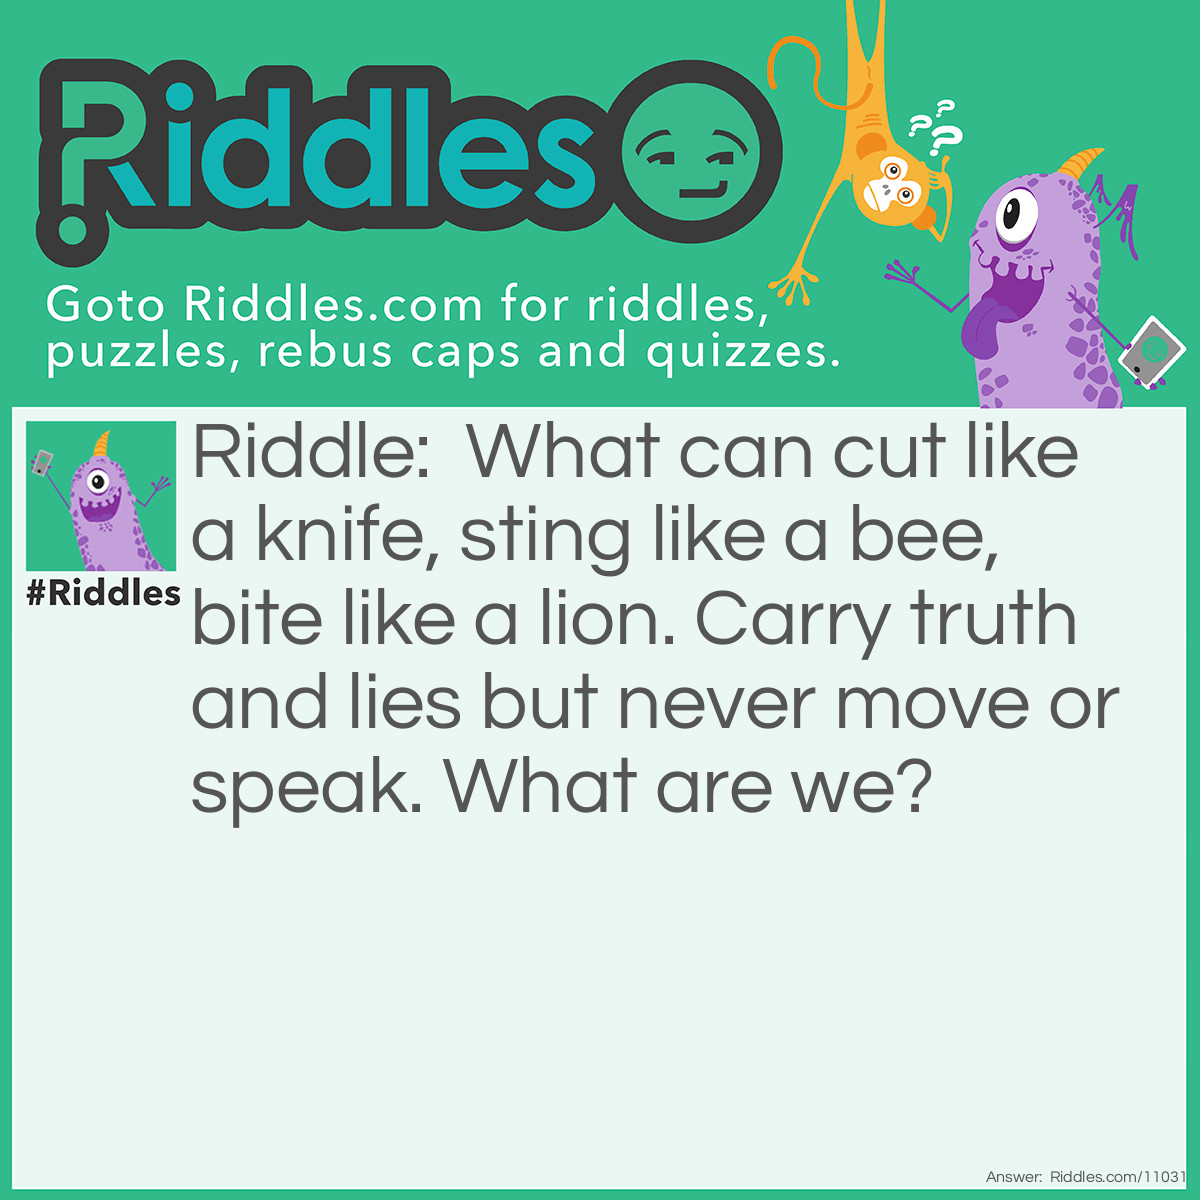 Riddle: What can cut like a knife, sting like a bee, bite like a lion. Carry truth and lies but never move or speak. What are we? Answer: Words.